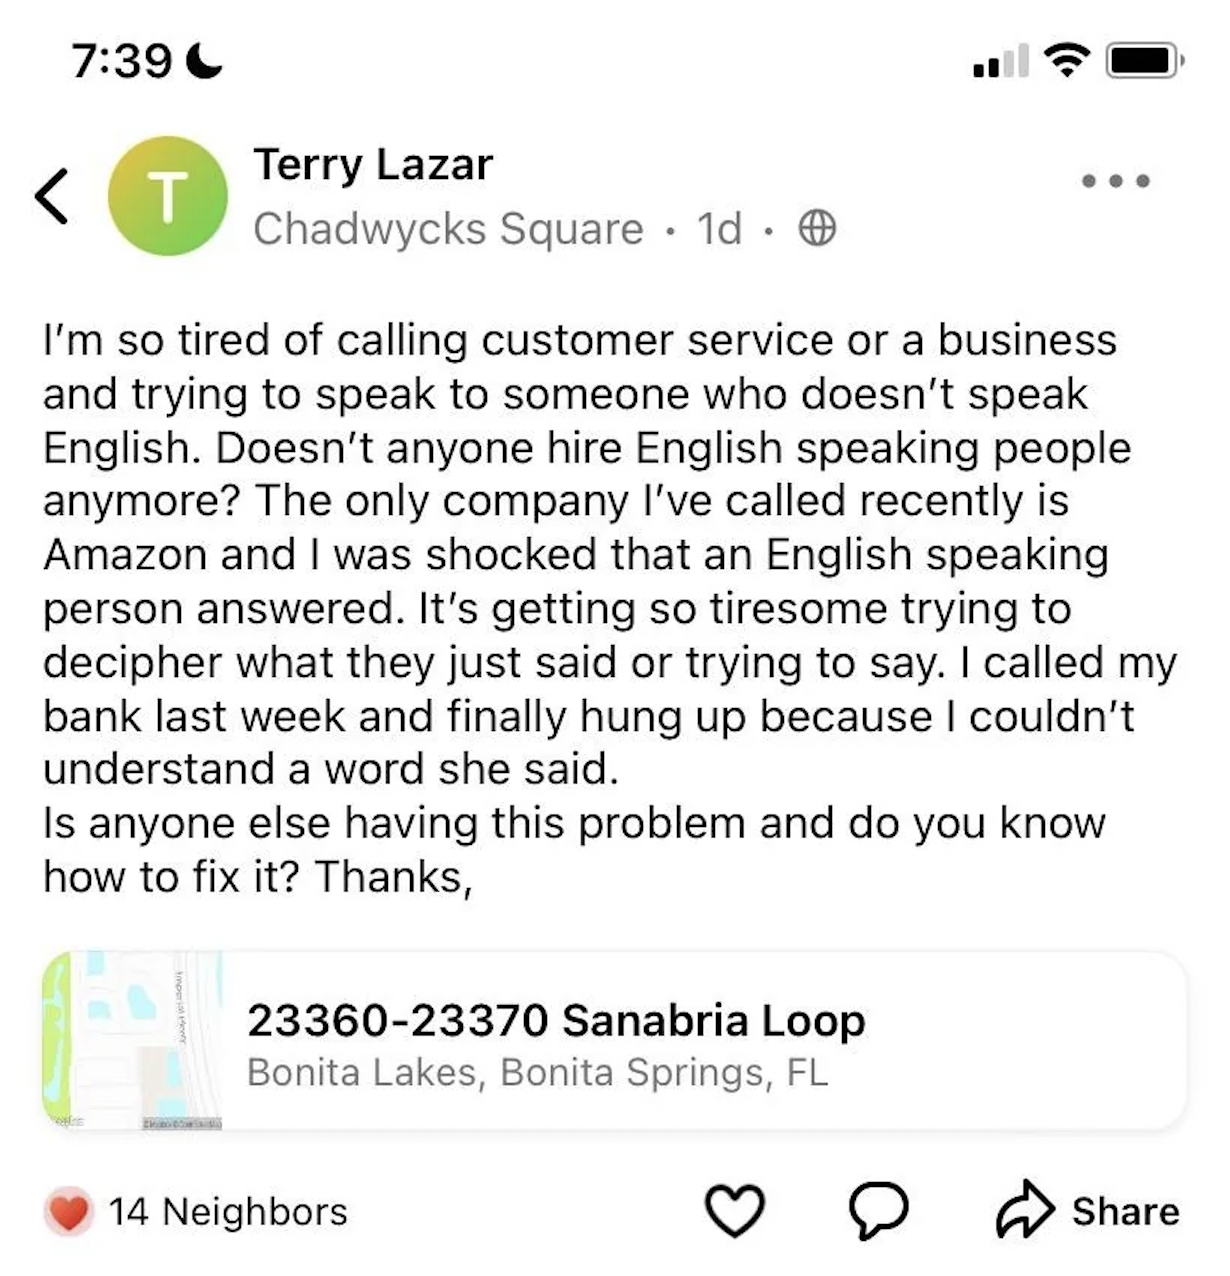 screenshot - Terry Lazar T Chadwycks Square . 1d. I'm so tired of calling customer service or a business and trying to speak to someone who doesn't speak English. Doesn't anyone hire English speaking people anymore? The only company I've called recently i